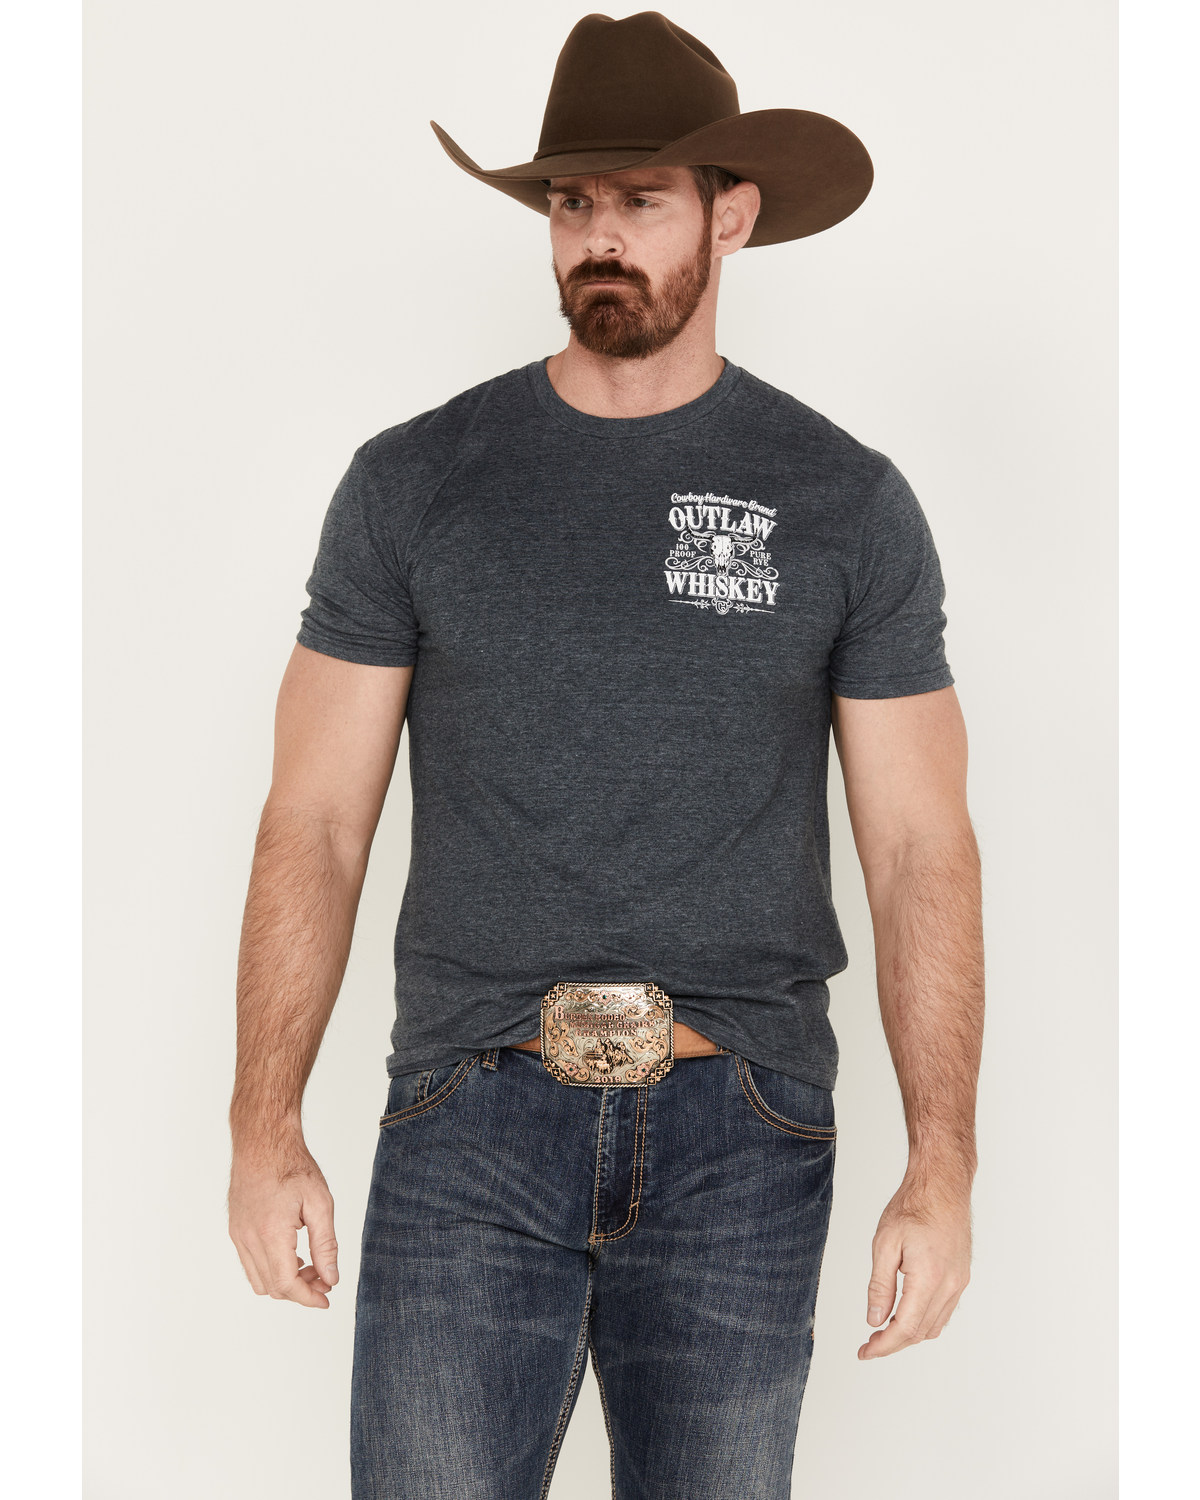 Cowboy Hardware Men's Outlaw Whiskey Short Sleeve Graphic T-Shirt